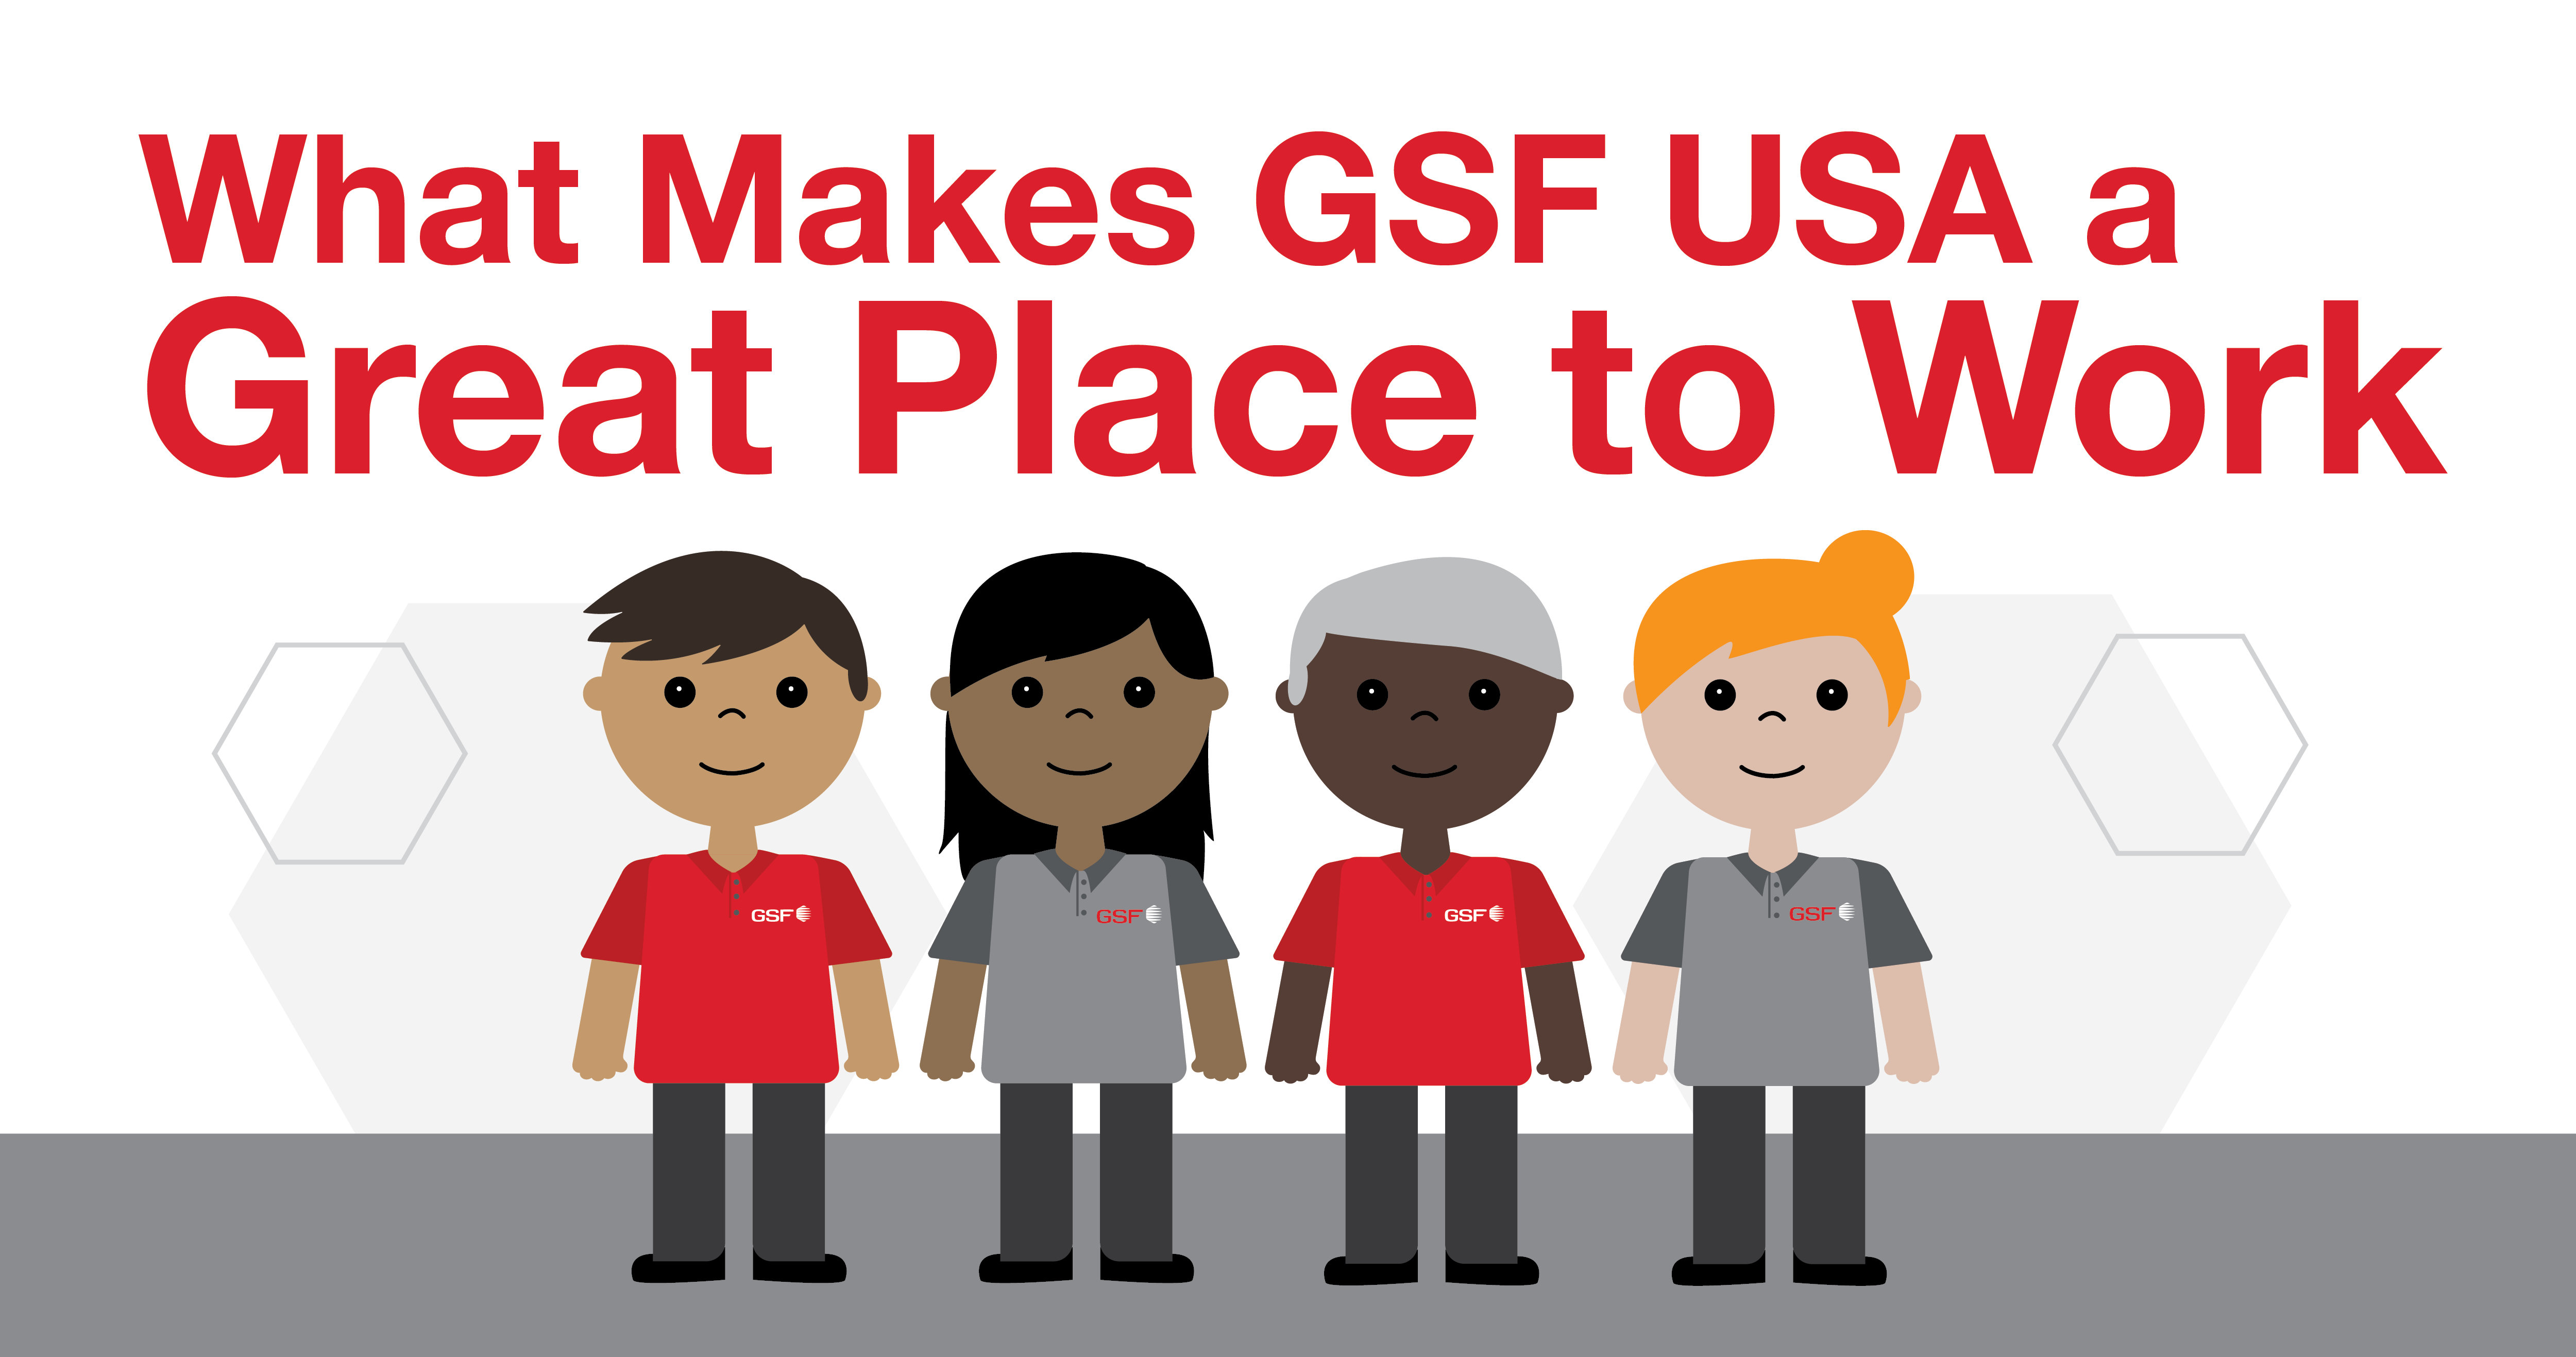 What Makes GSF USA a Great Place to Work